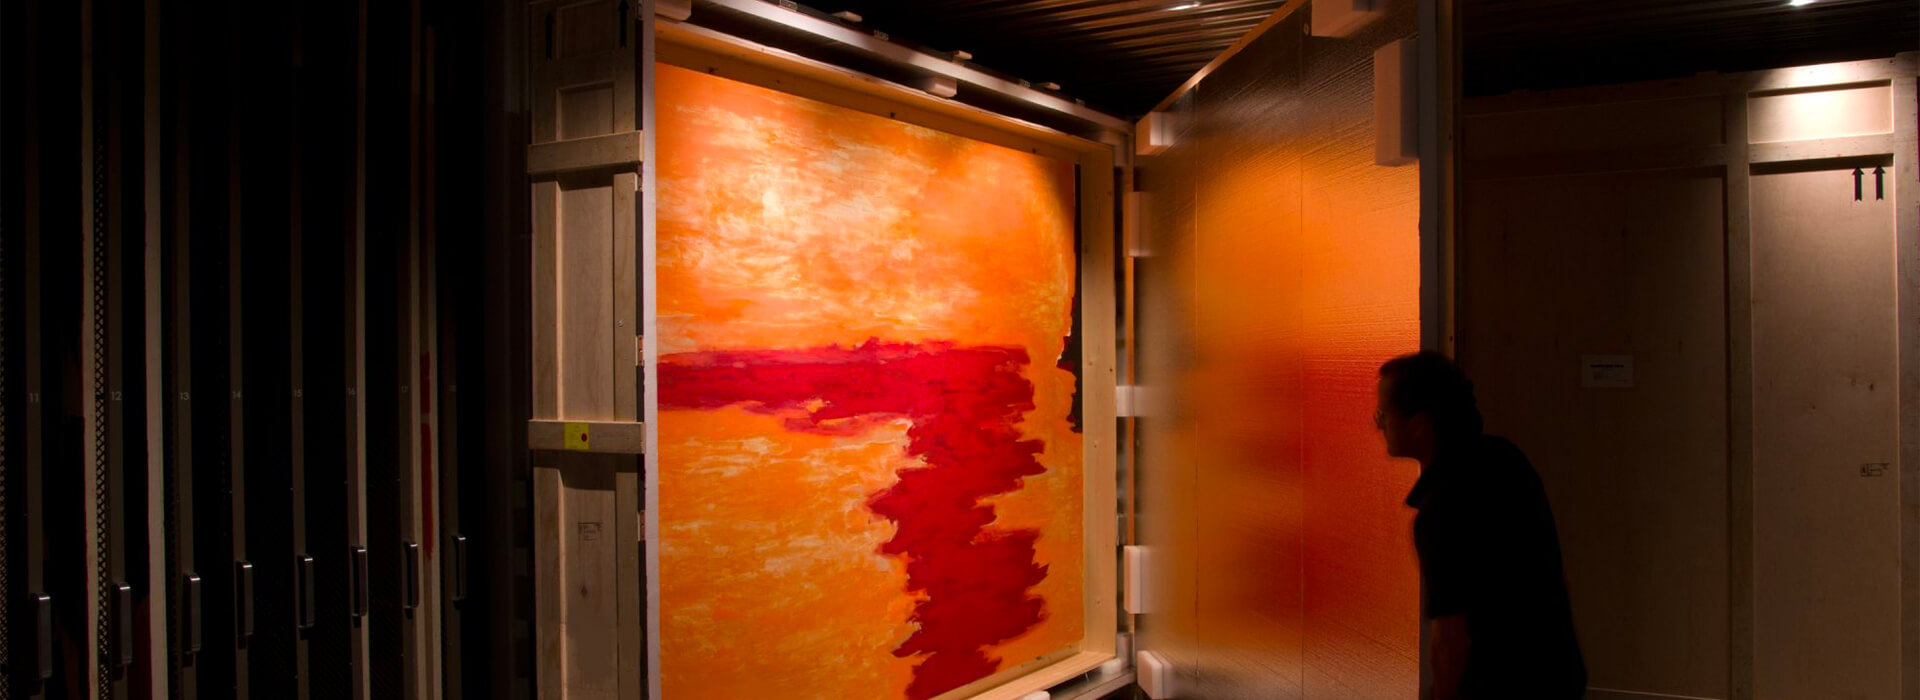 Painting storage image at the Clyfford Still Museum